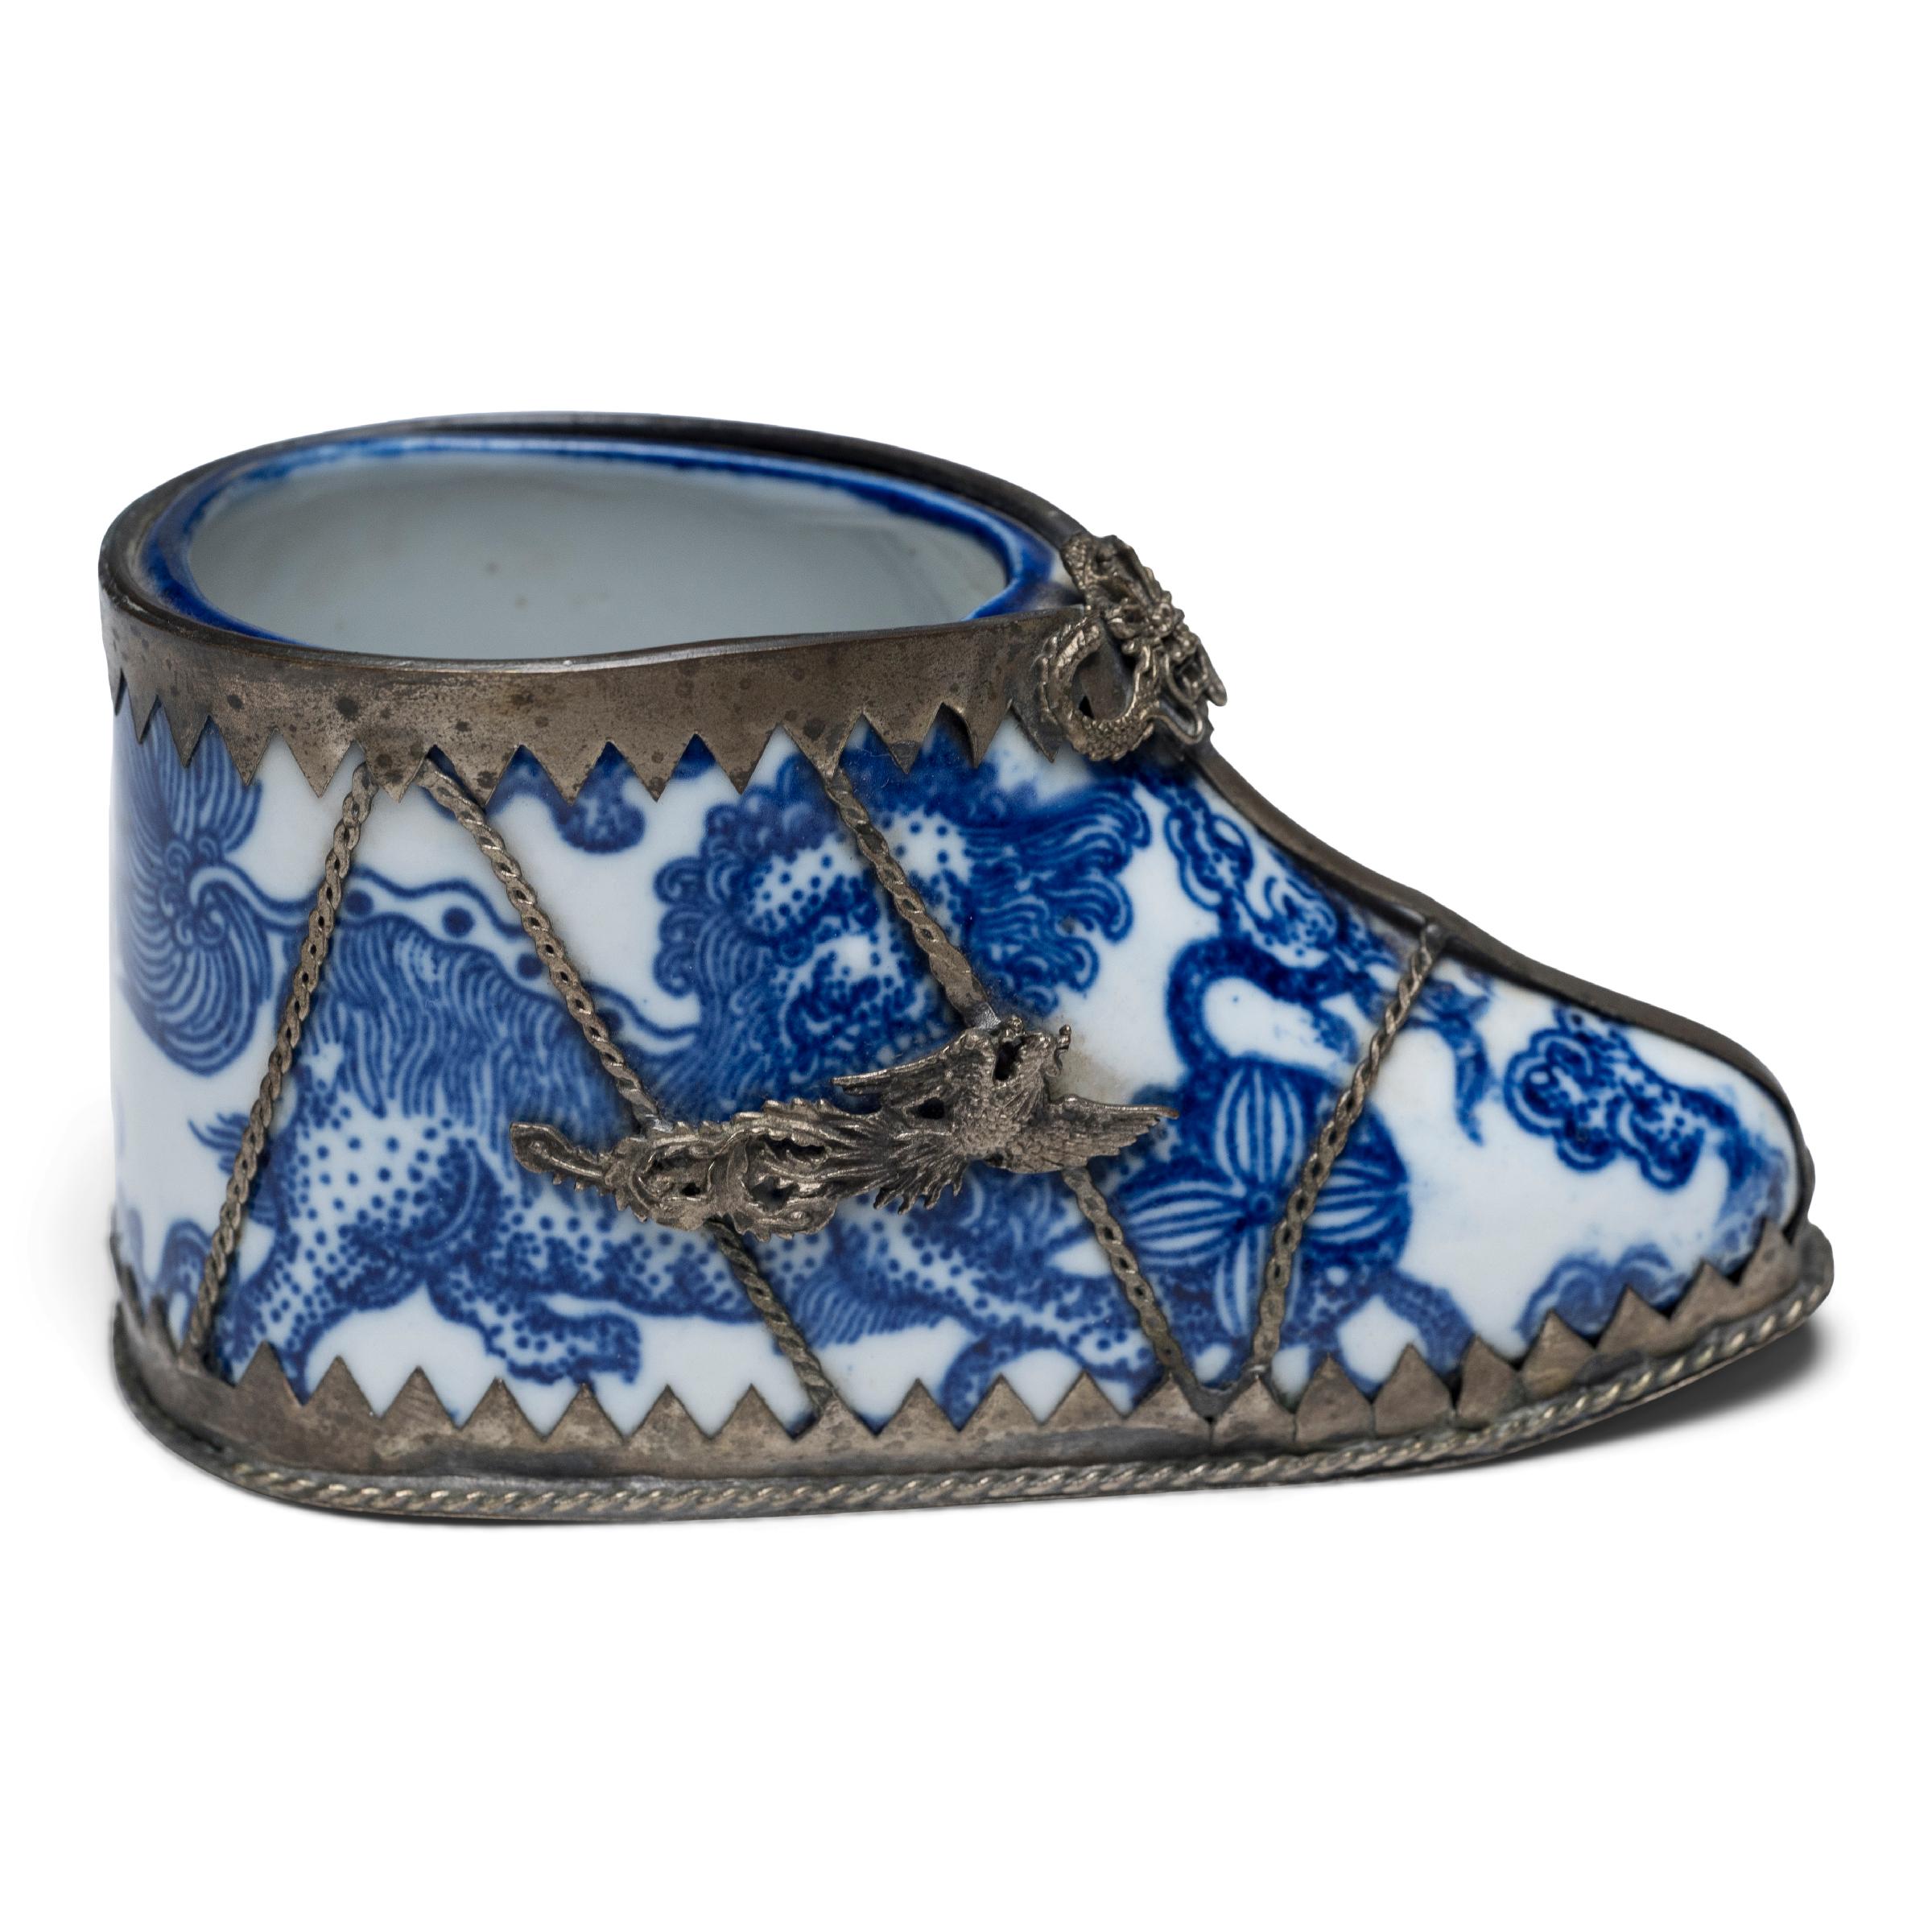 Glazed Pair of Chinese Blue and White Lotus Shoes, c. 1900